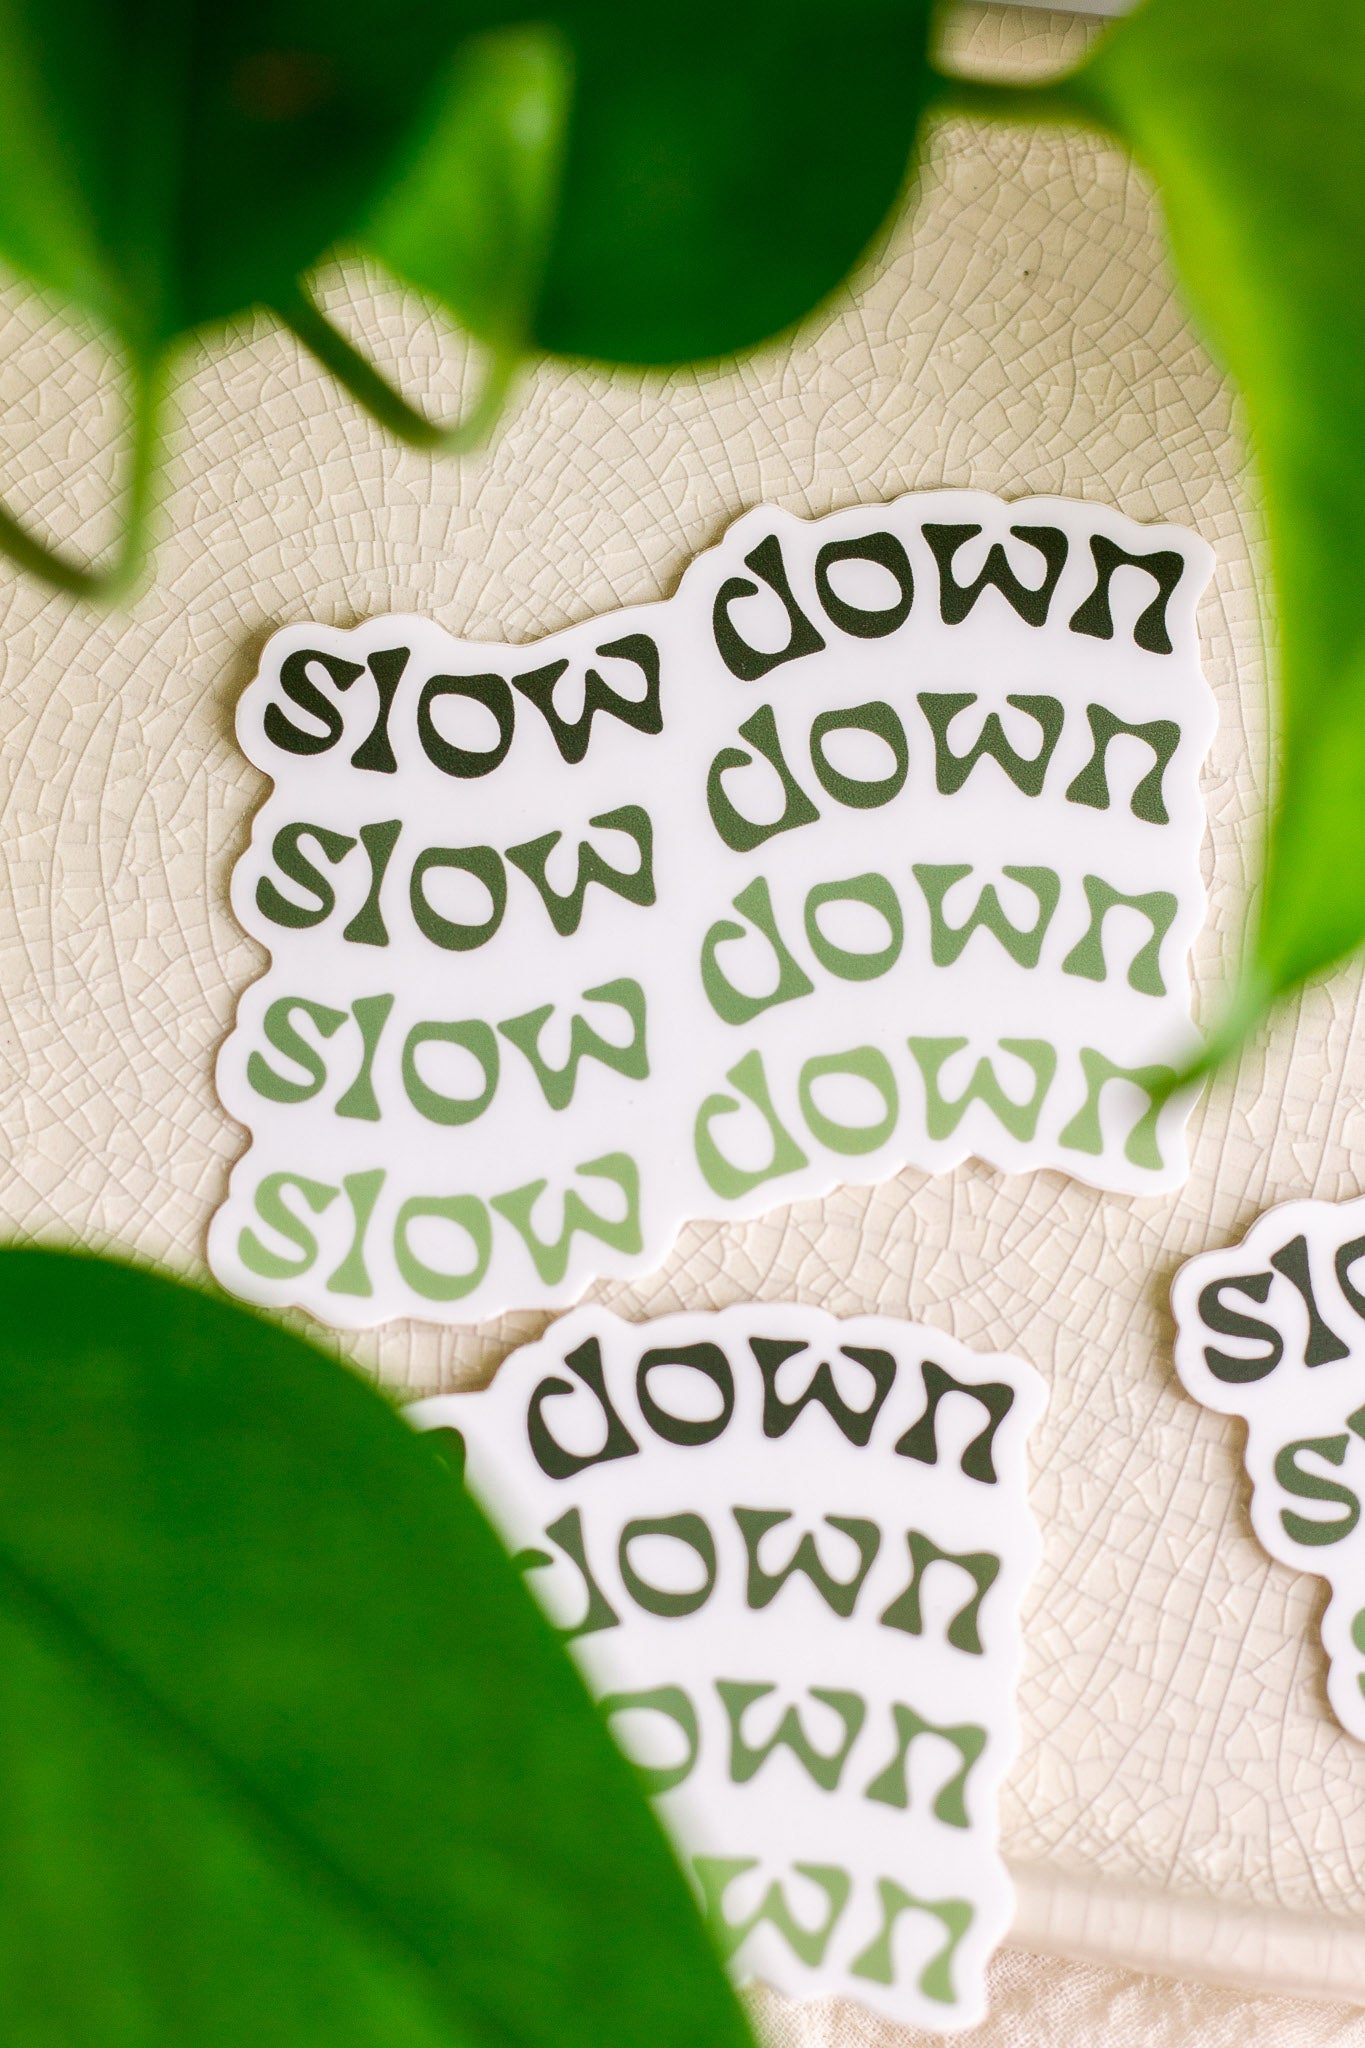 Slow Down Vinyl Sticker on a decorative tray with plants surrounding it